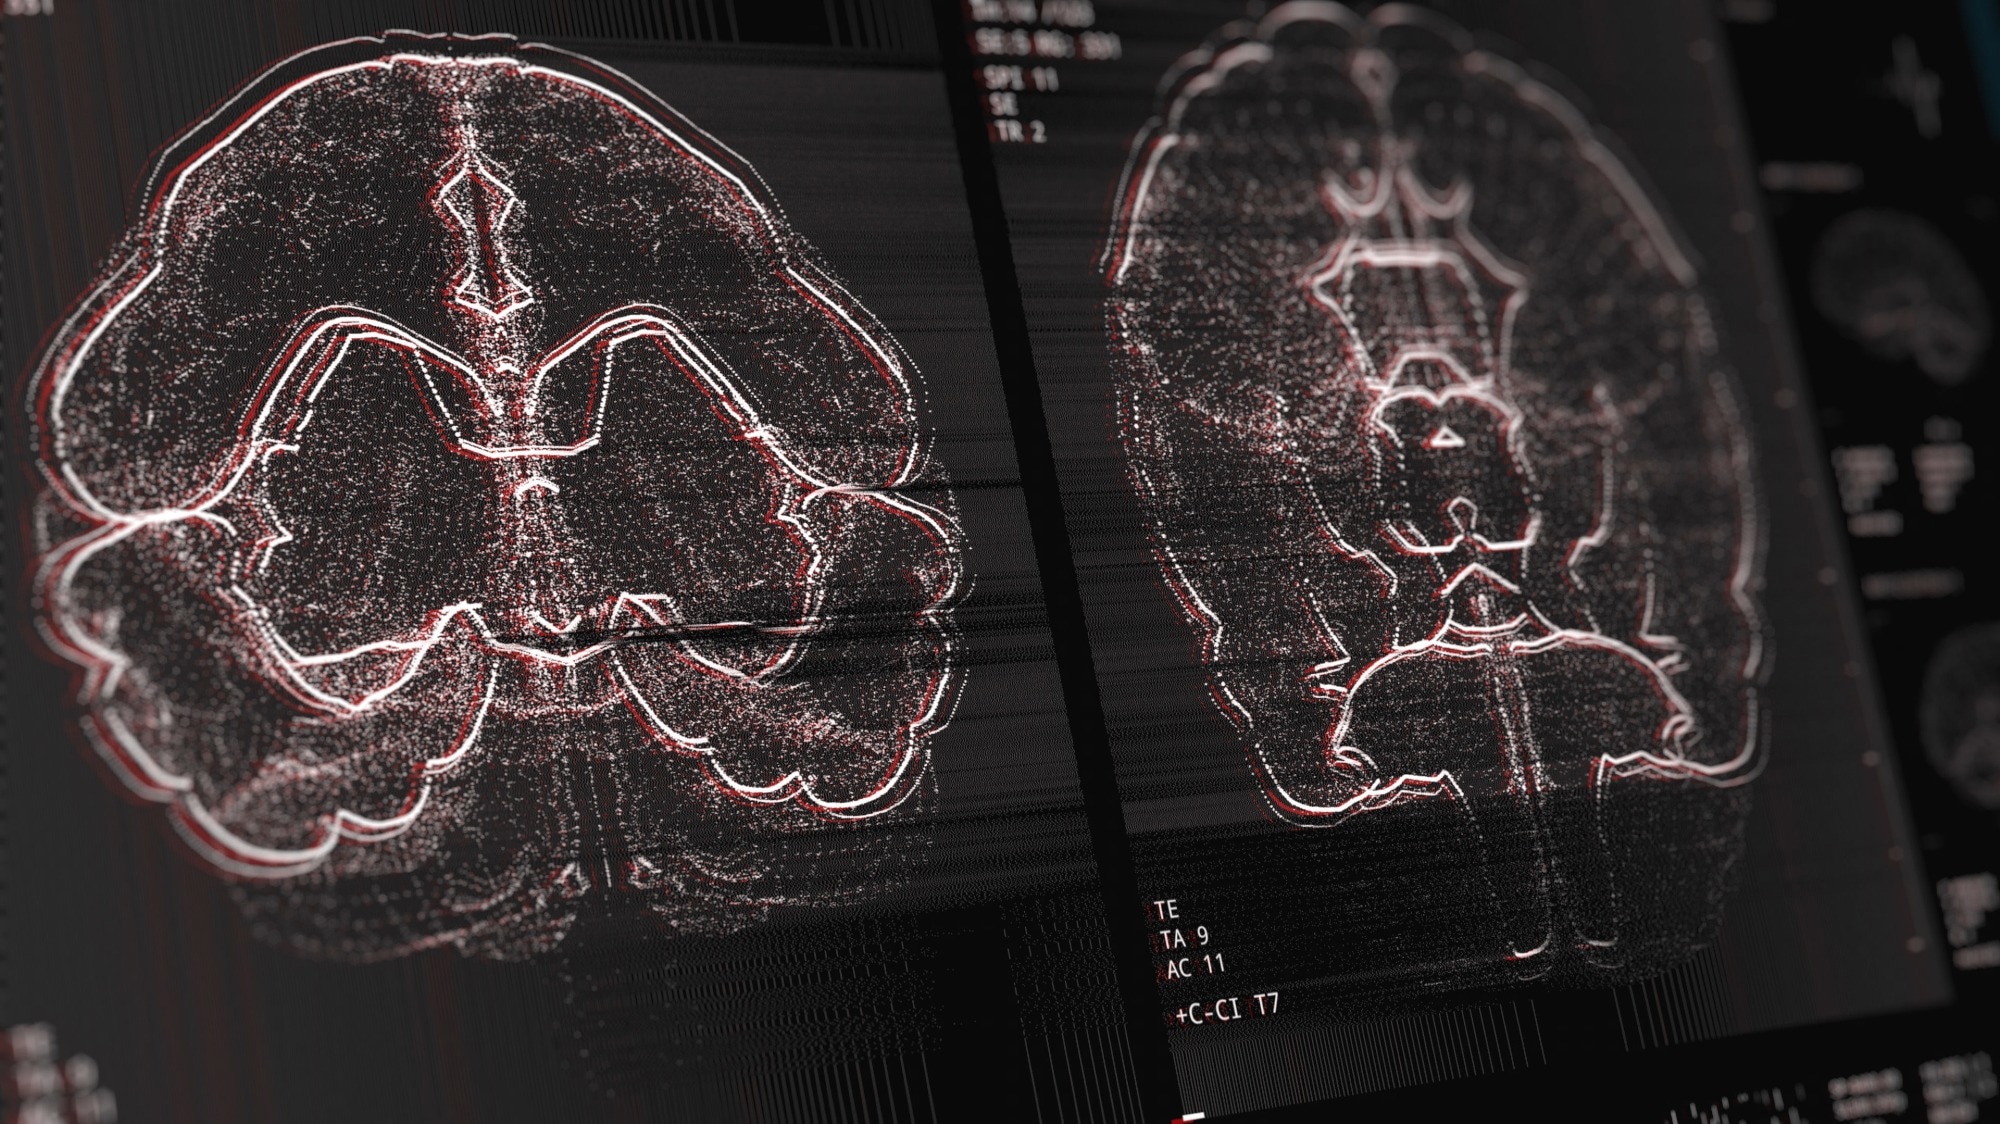 Can artificial intelligence pass the Fellowship of the Royal College of Radiologists examination? Multi-reader diagnostic accuracy study. Image Credit: SquareMotion / Shutterstock